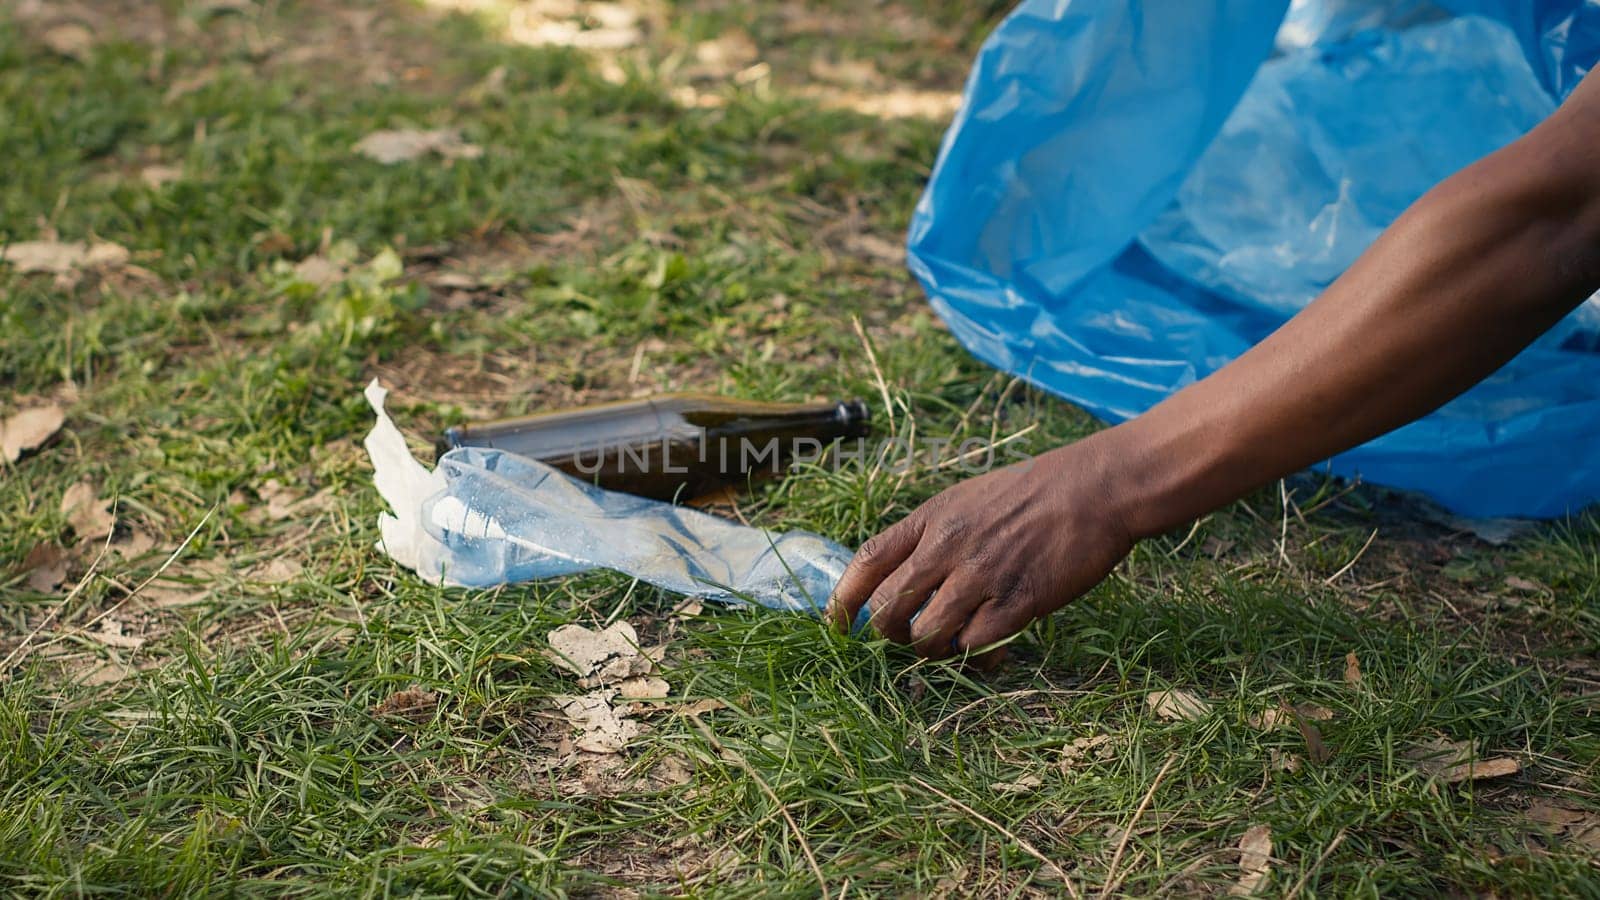 People supporting cleanup of the natural environment by grabbing recyclables and trash objects from the woods, collecting in a garbage bag. Using utensils to pick up rubbish. Close up. Camera A.